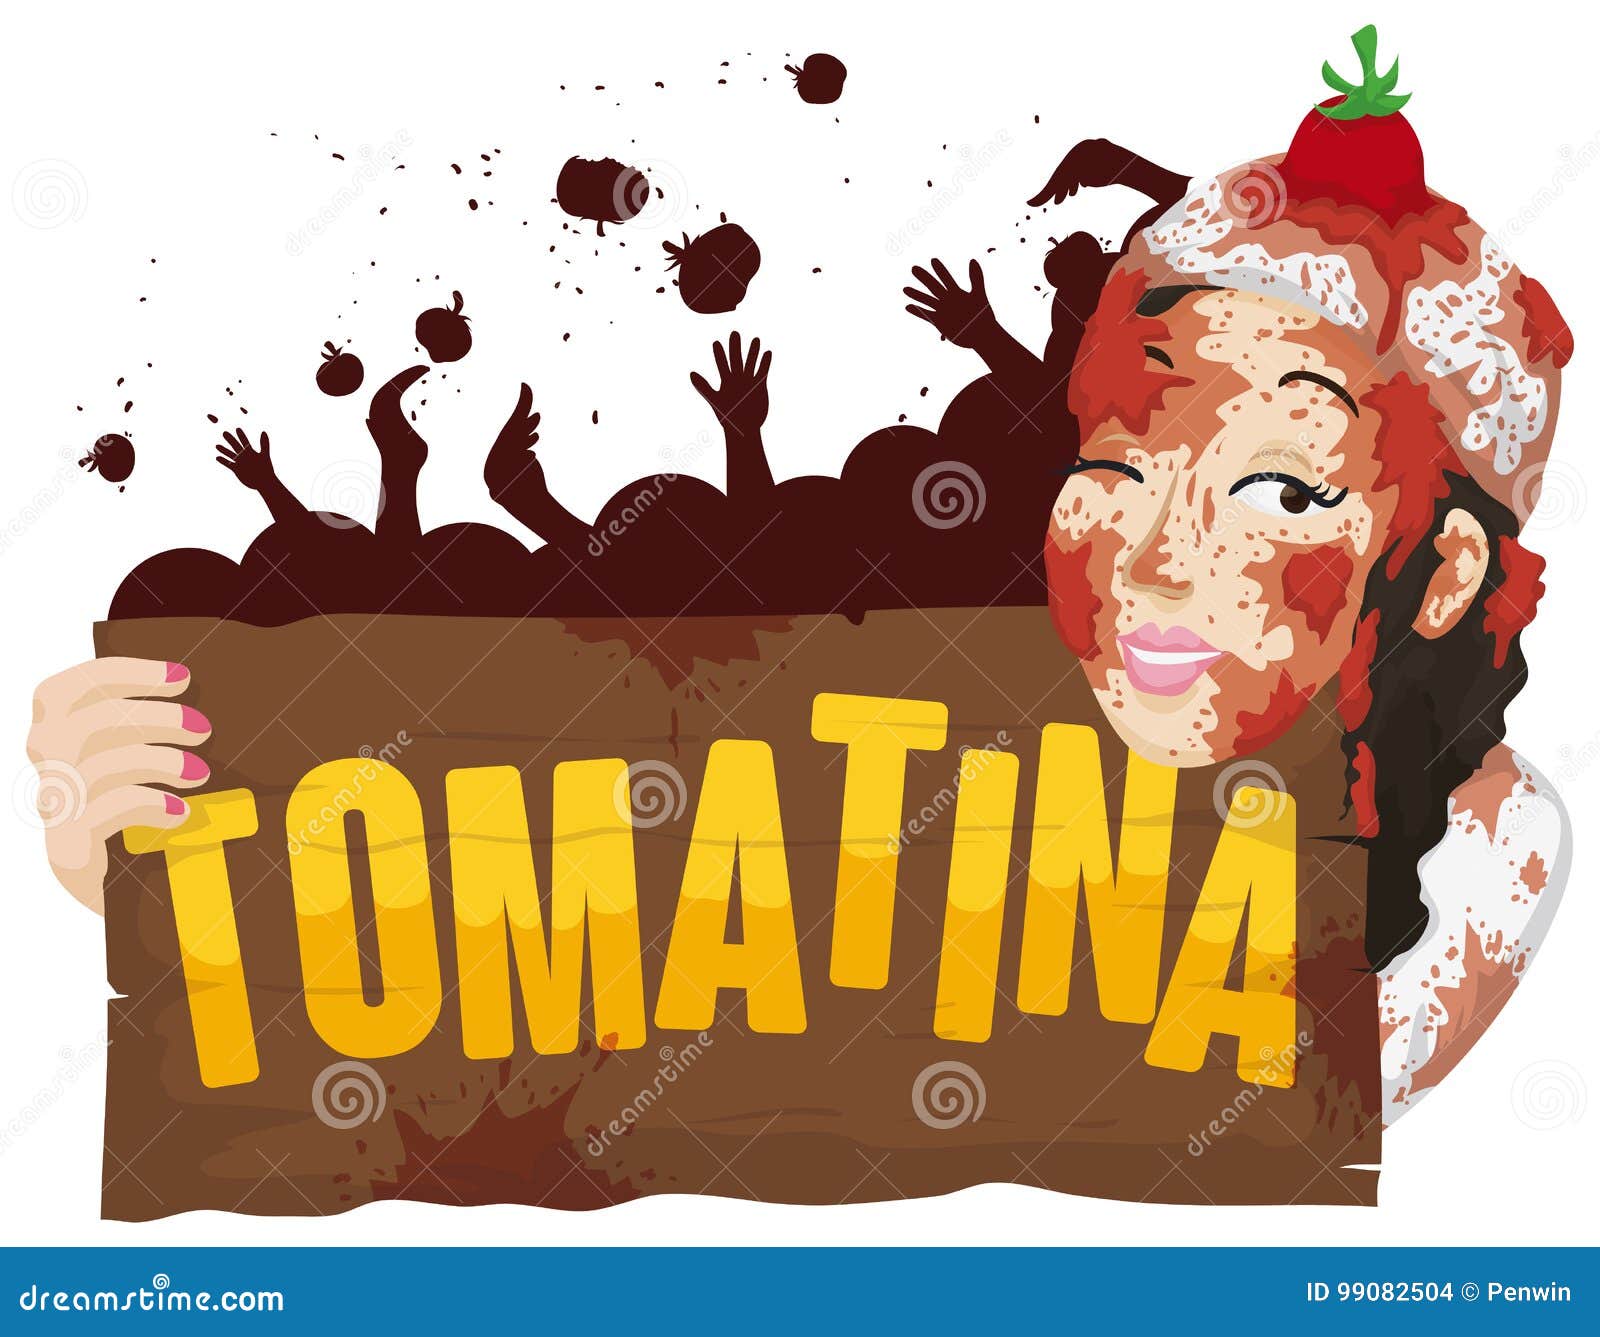 woman covered with tomatoes holding a sign for tomatina festival,  